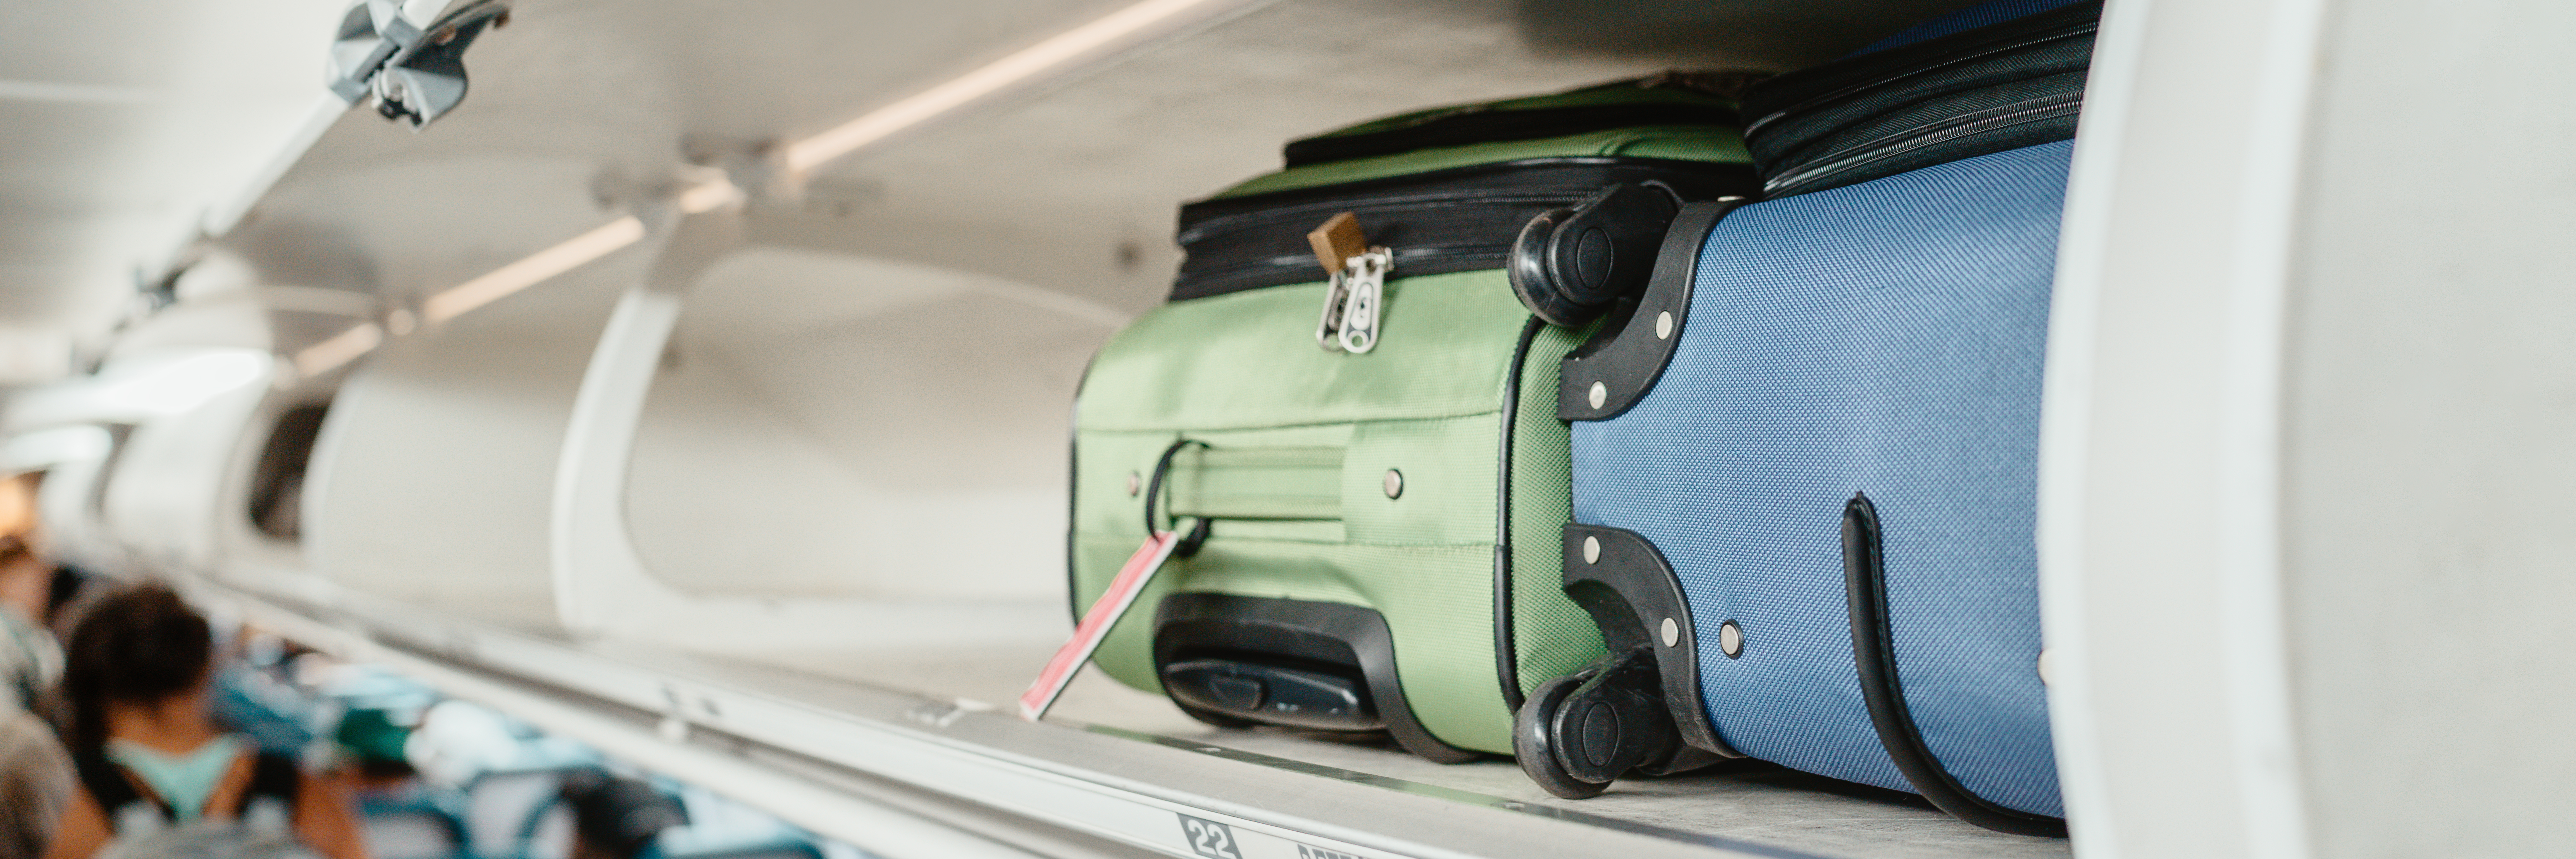 10 Best Carry-On Luggage Options for Travel - The Travel Hack